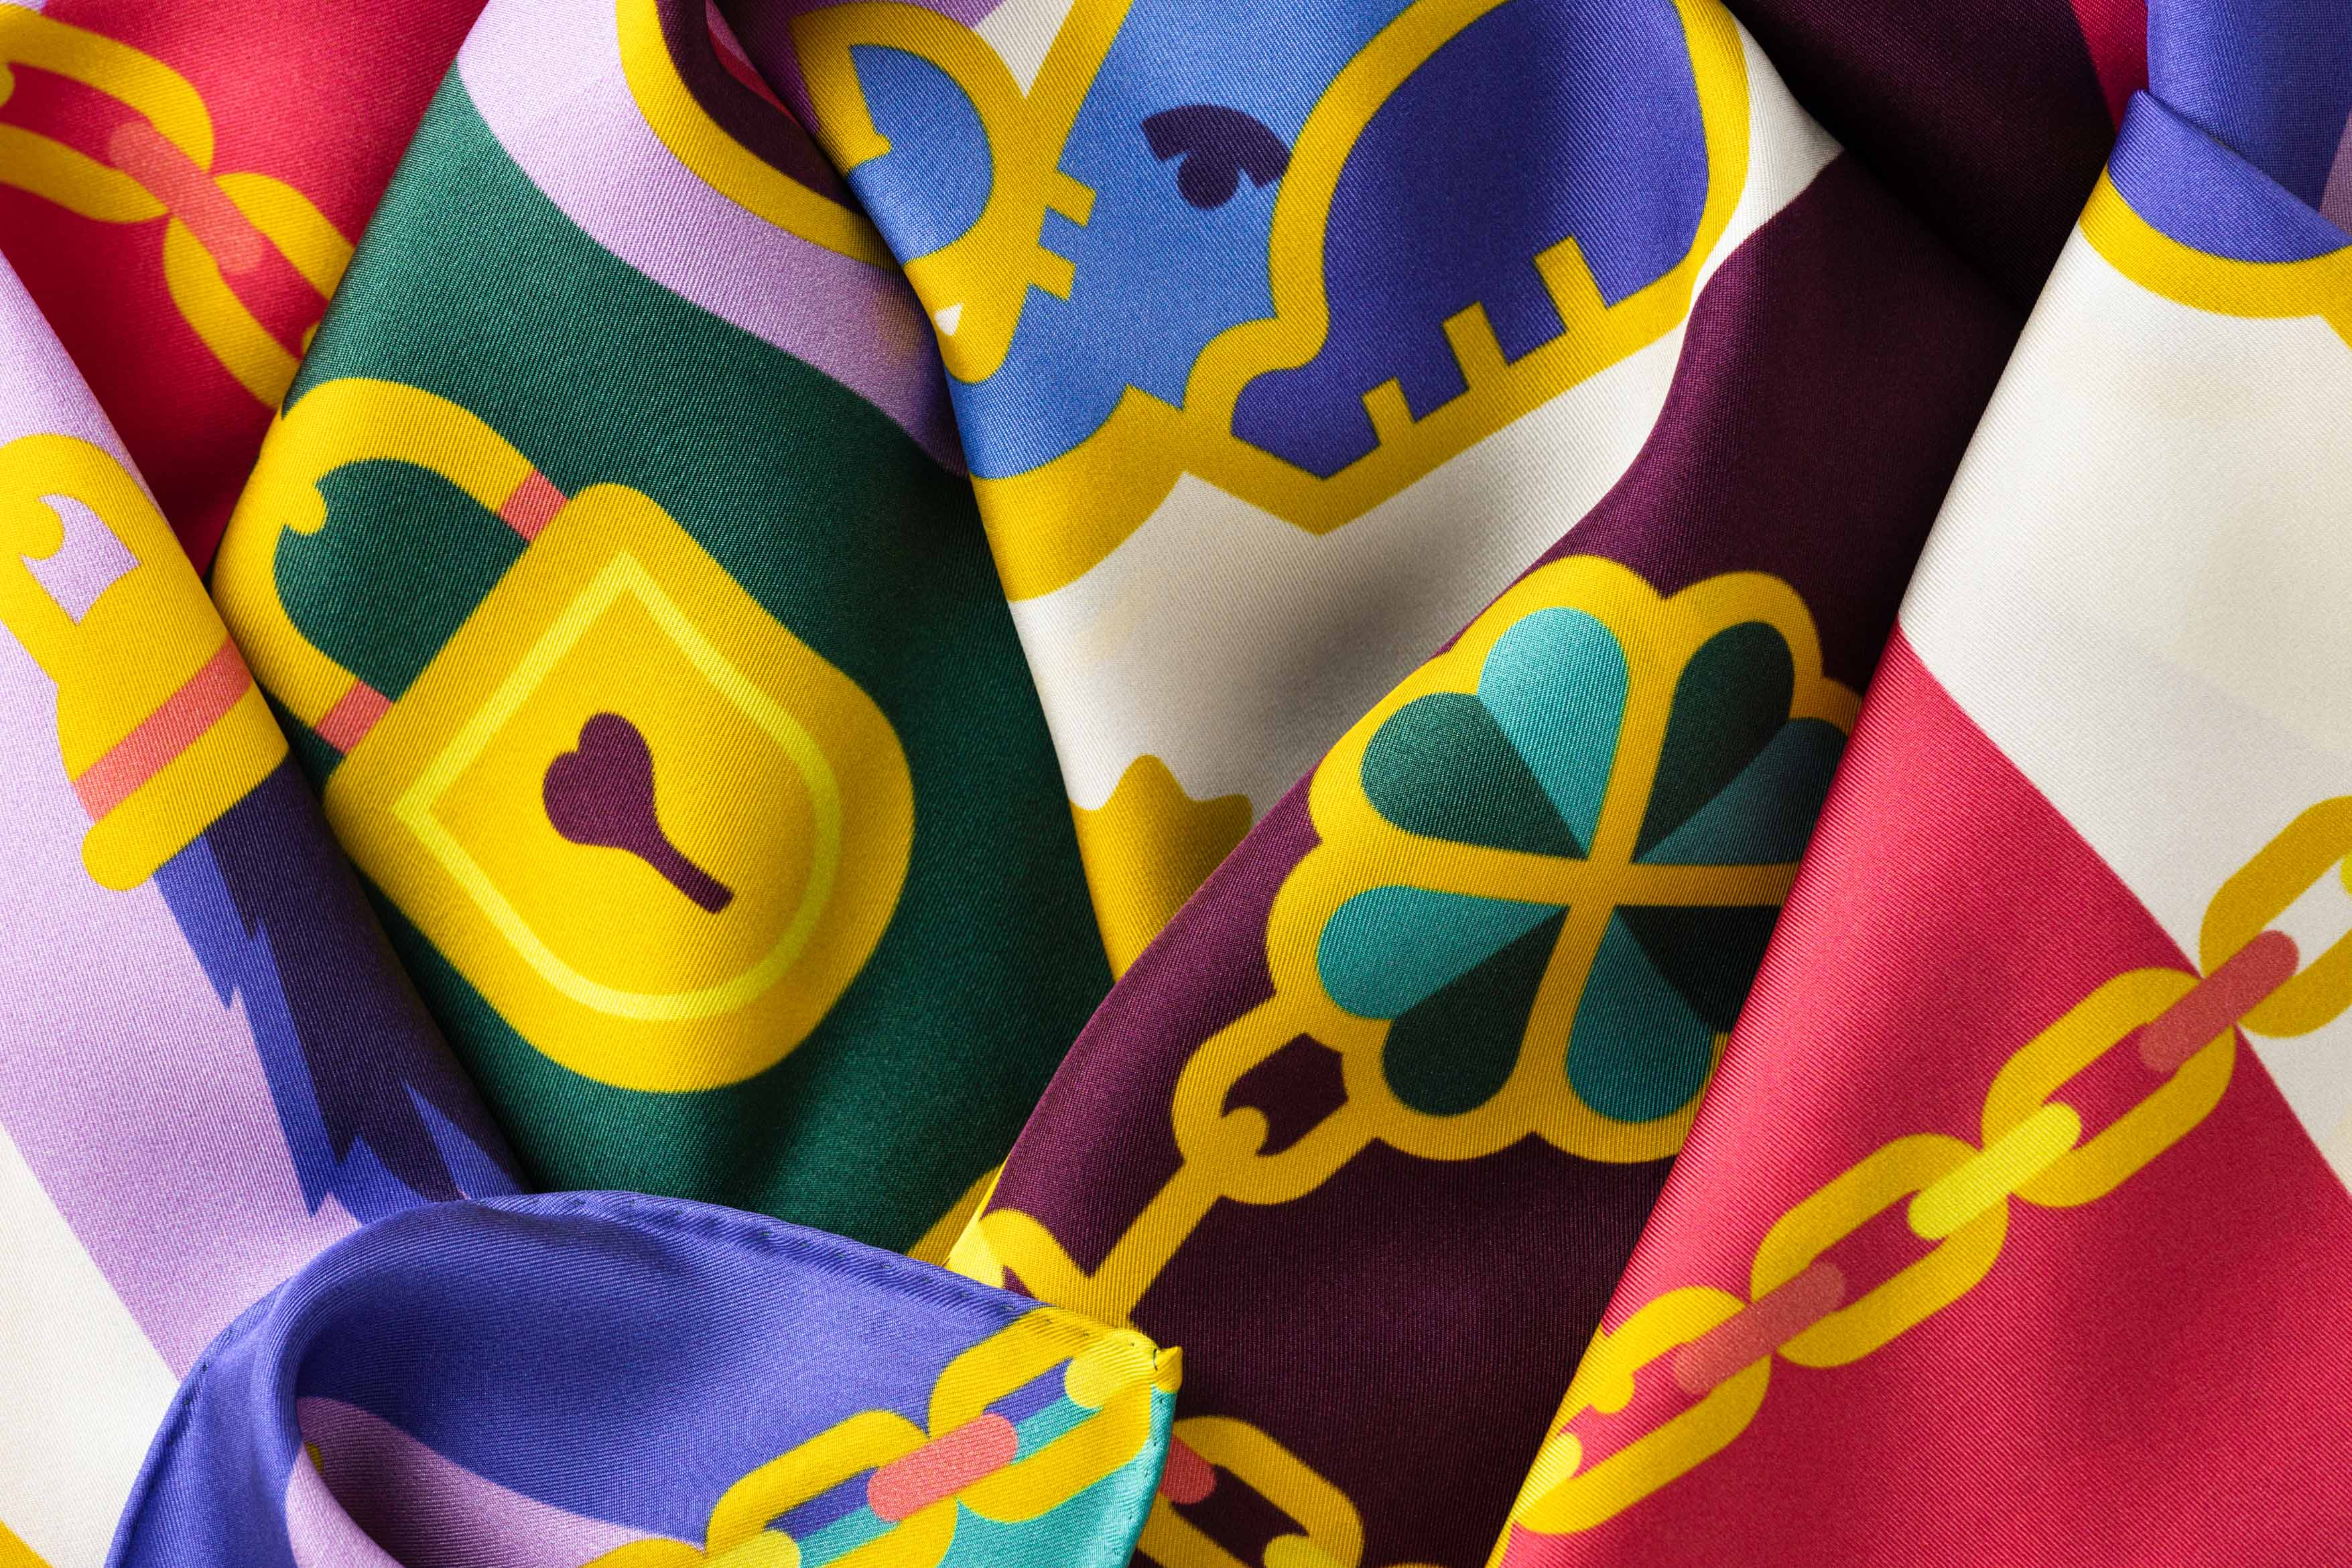 Close-up image of 100% silk square scarf featuring a motif of jewel toned good luck charms such as ladybugs, horseshoes, four leaf clovers, wishbones on a large gold chain with the evil eye symbol at the center. Illustrates the lightly ridged texture of the silk twill along with the rich color tones and luminous nature of the silk scarf.]